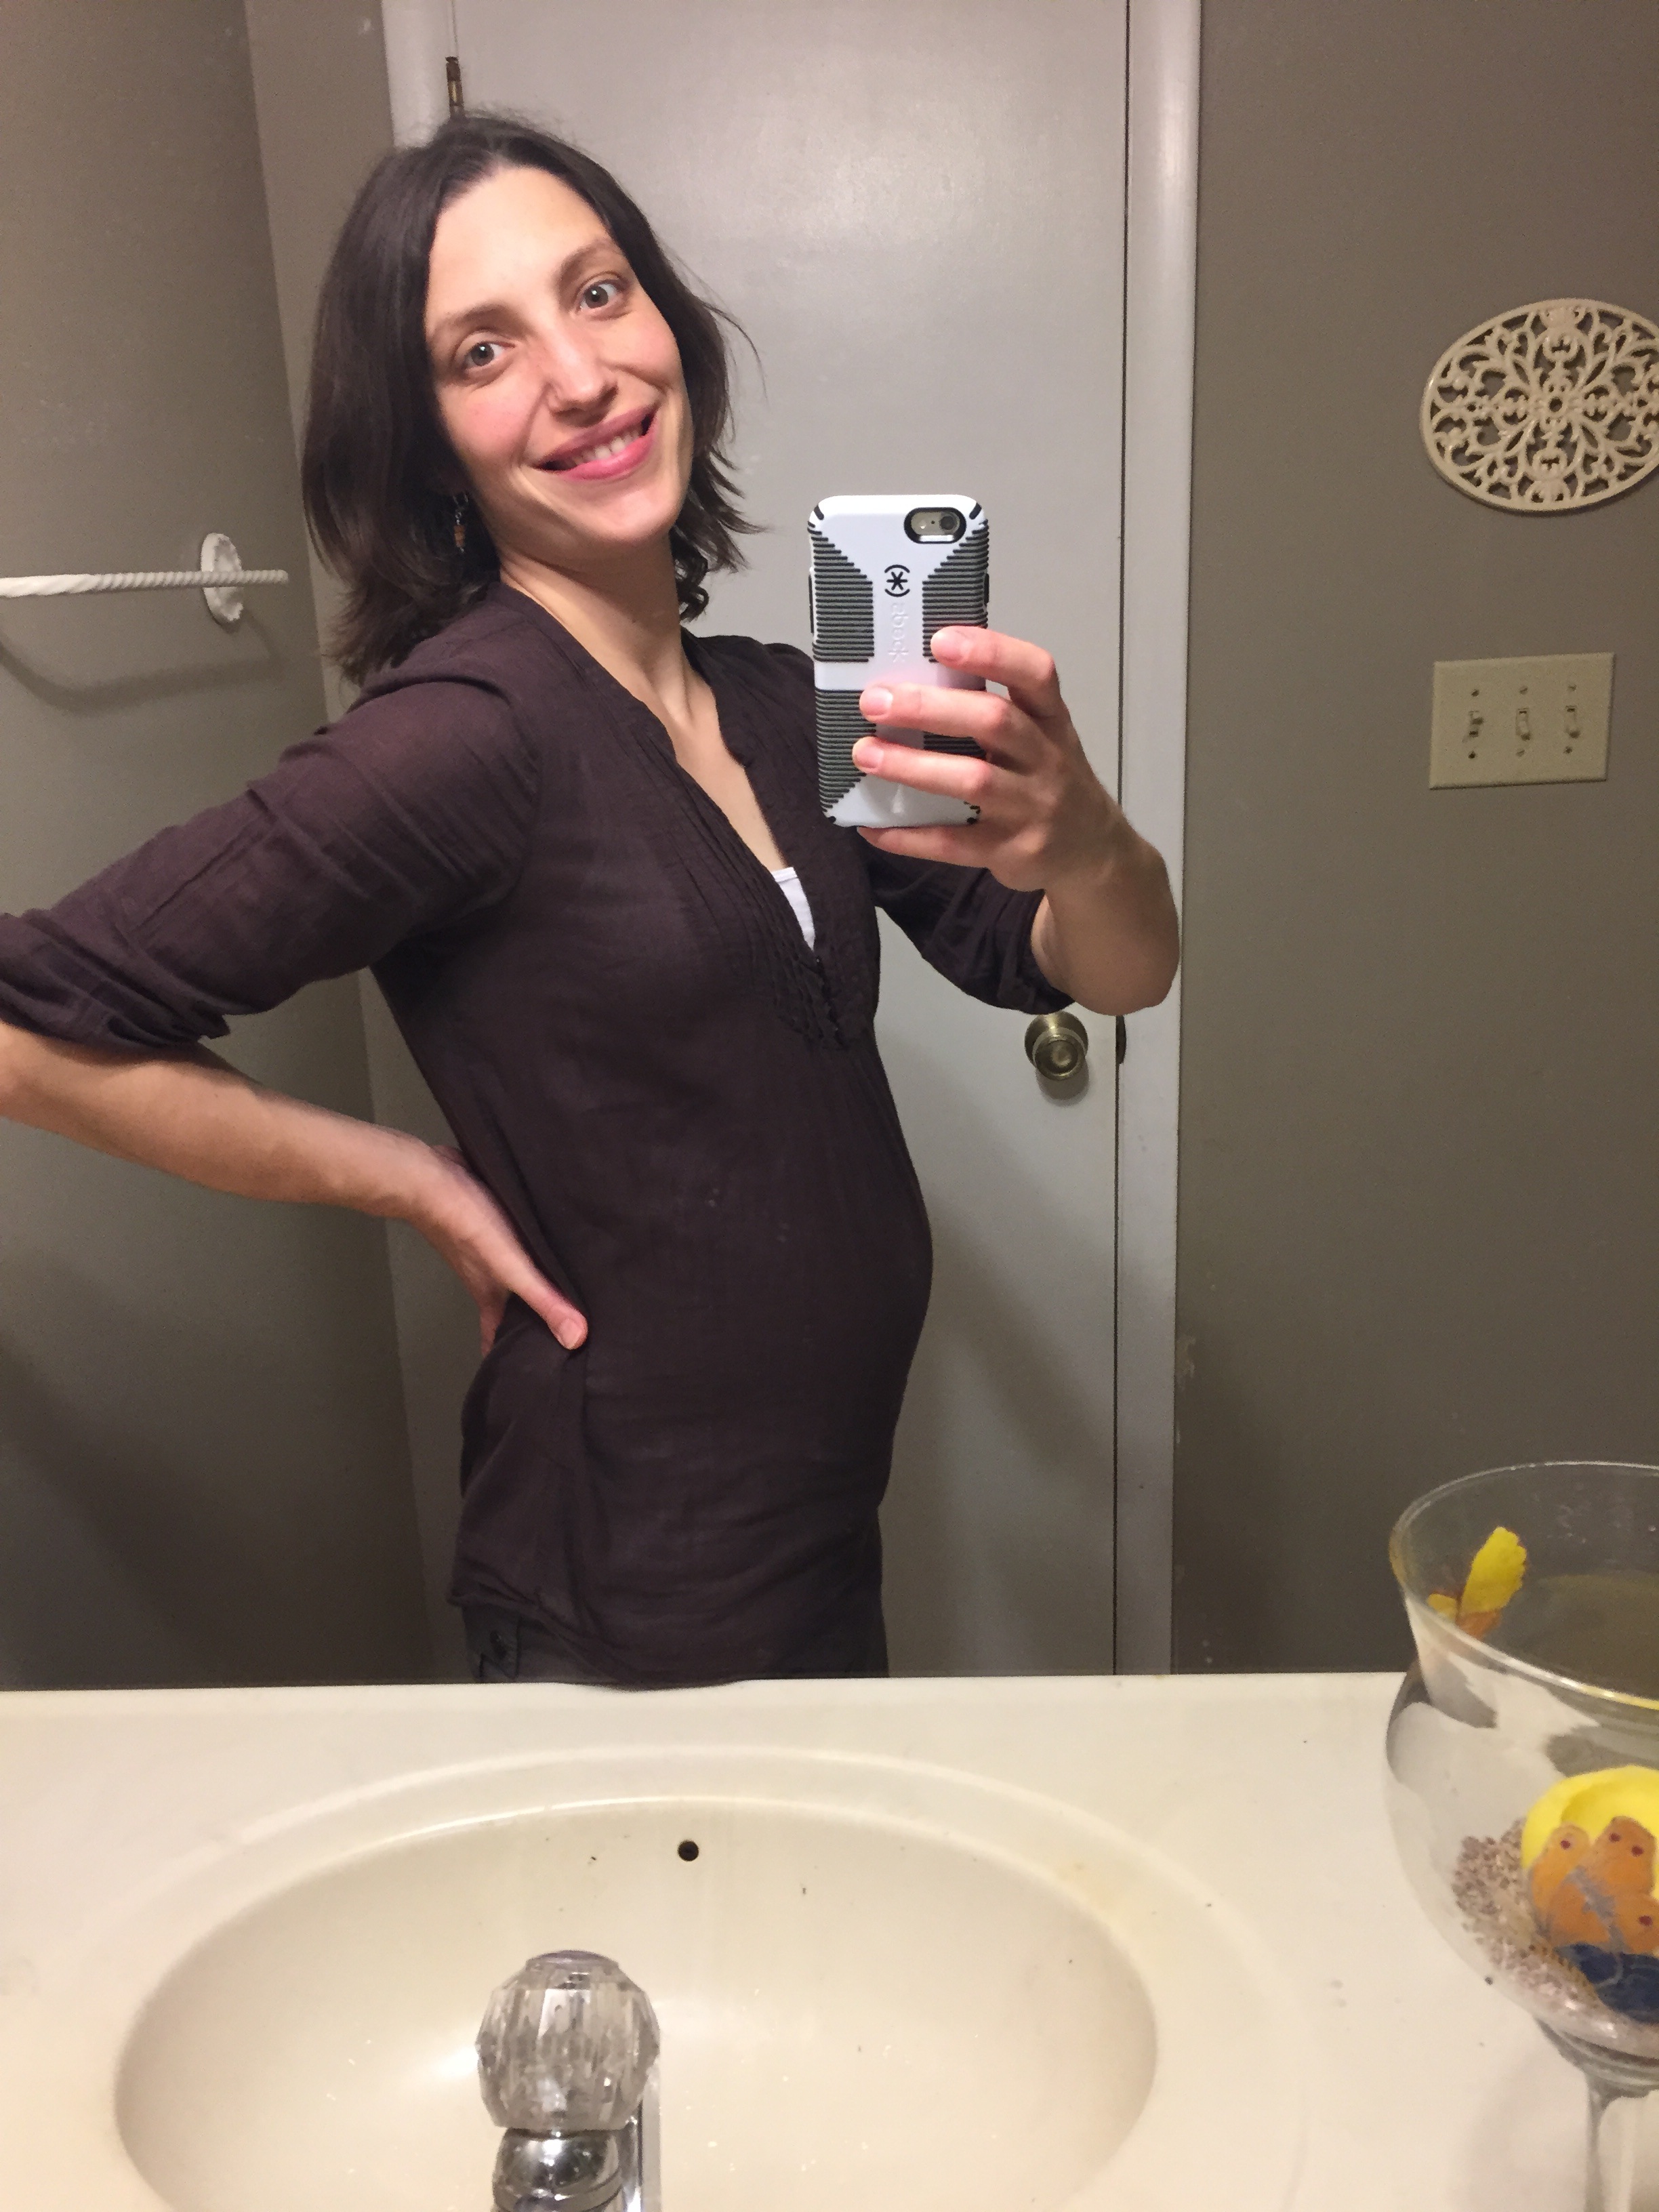 23 weeks 6 days pregnant 4th